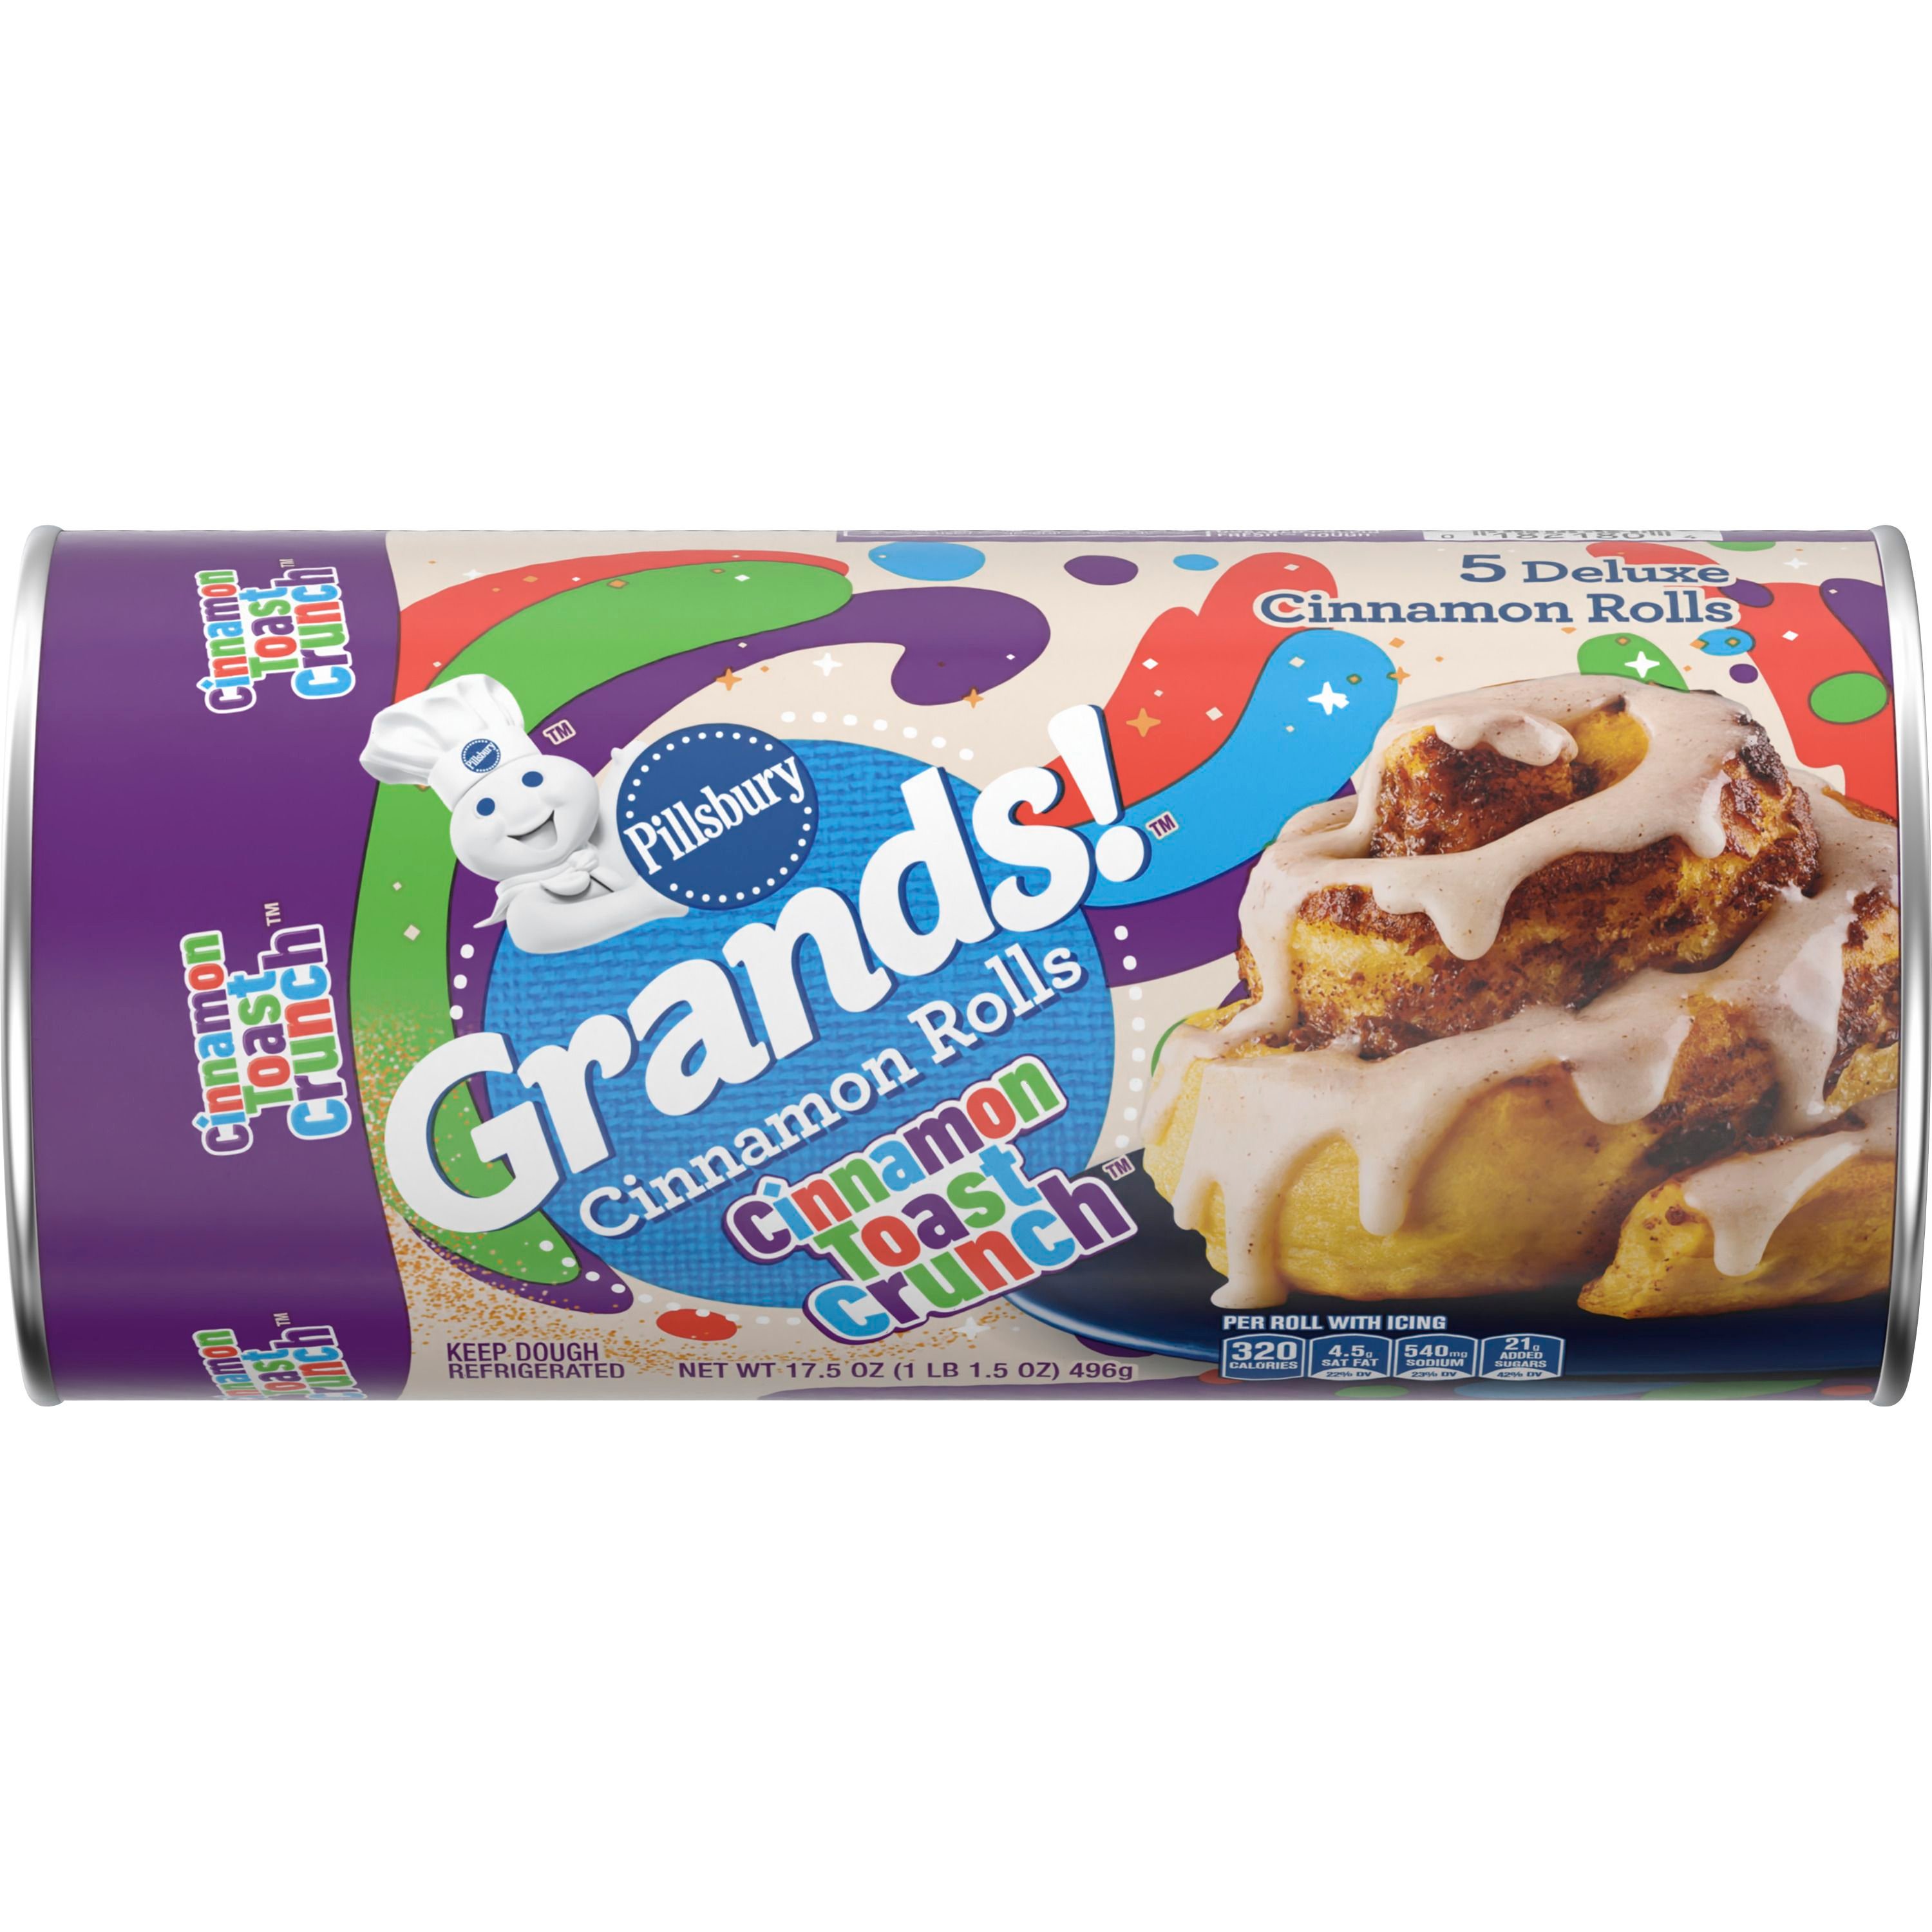 Pillsbury Grands! Cinnamon Toast Crunch Cinnamon Rolls, Limited Edition Canned Pastry Dough, 5 Deluxe Rolls, 17.5 oz - Front